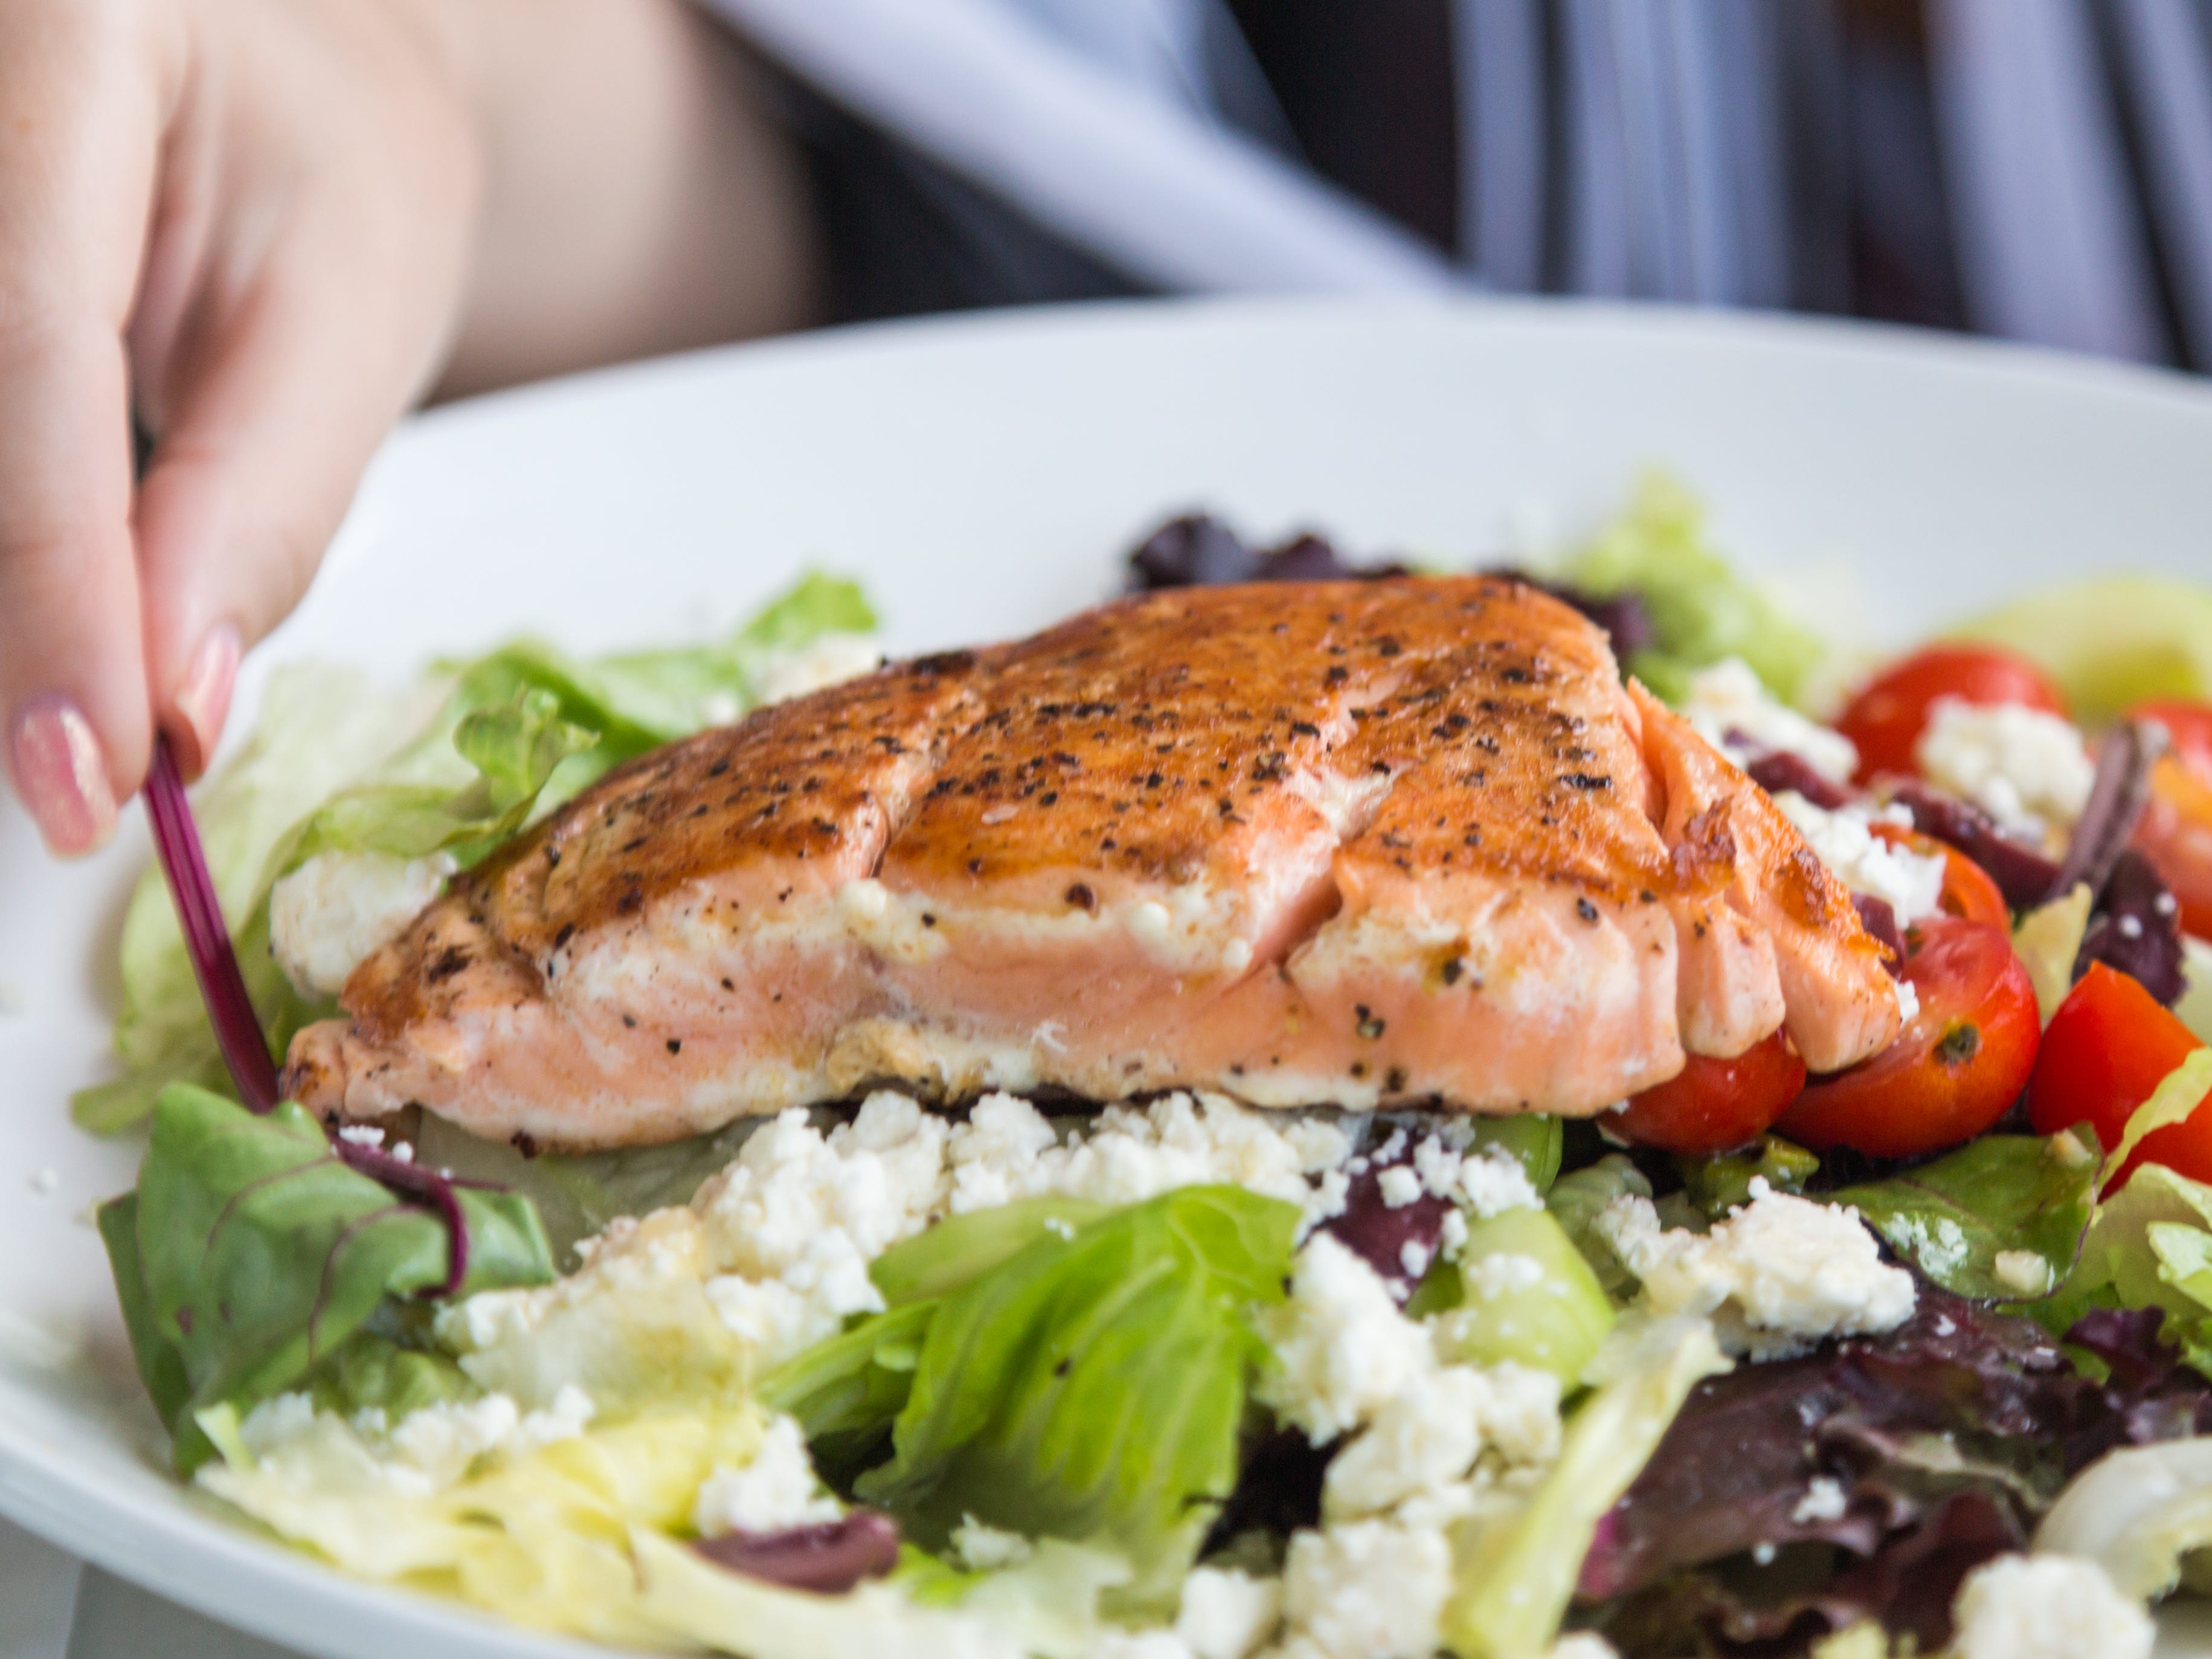 <p>"One of my absolute favorite foods for weight loss is salmon," Fillenworth told Insider.</p><p>Although <a href="https://www.insider.com/healthiest-fish-to-eat-expert-2019-7">salmon</a> is a fatty fish, she explained that eating the right kind of fat doesn't necessarily mean you're going to gain weight.</p><p>The fish contains <a href="https://www.healthline.com/nutrition/11-benefits-of-salmon#TOC_TITLE_HDR_2">essential omega-3 fatty acids</a>, which you have to get from your diet since the human body can't produce them.</p>